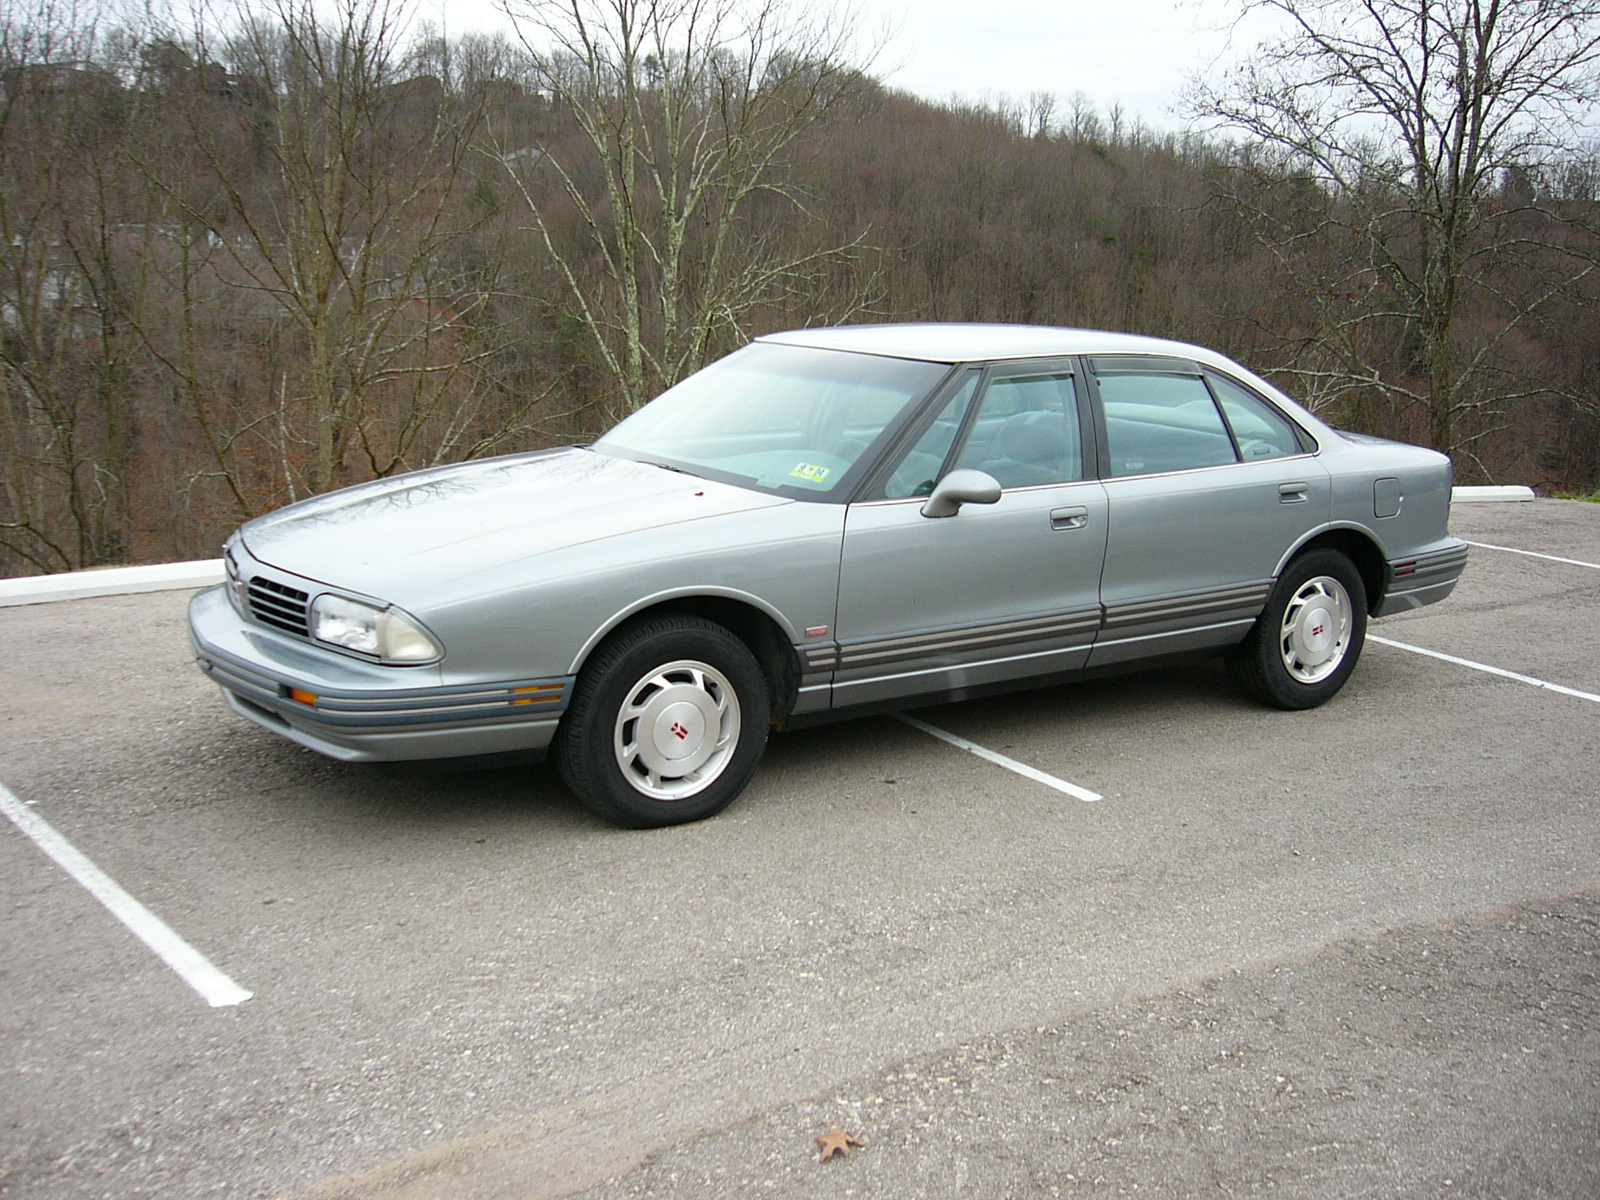 File:1995 Oldsmobile Eighty-Eight Royale in silver.jpg - Wikimedia Commons